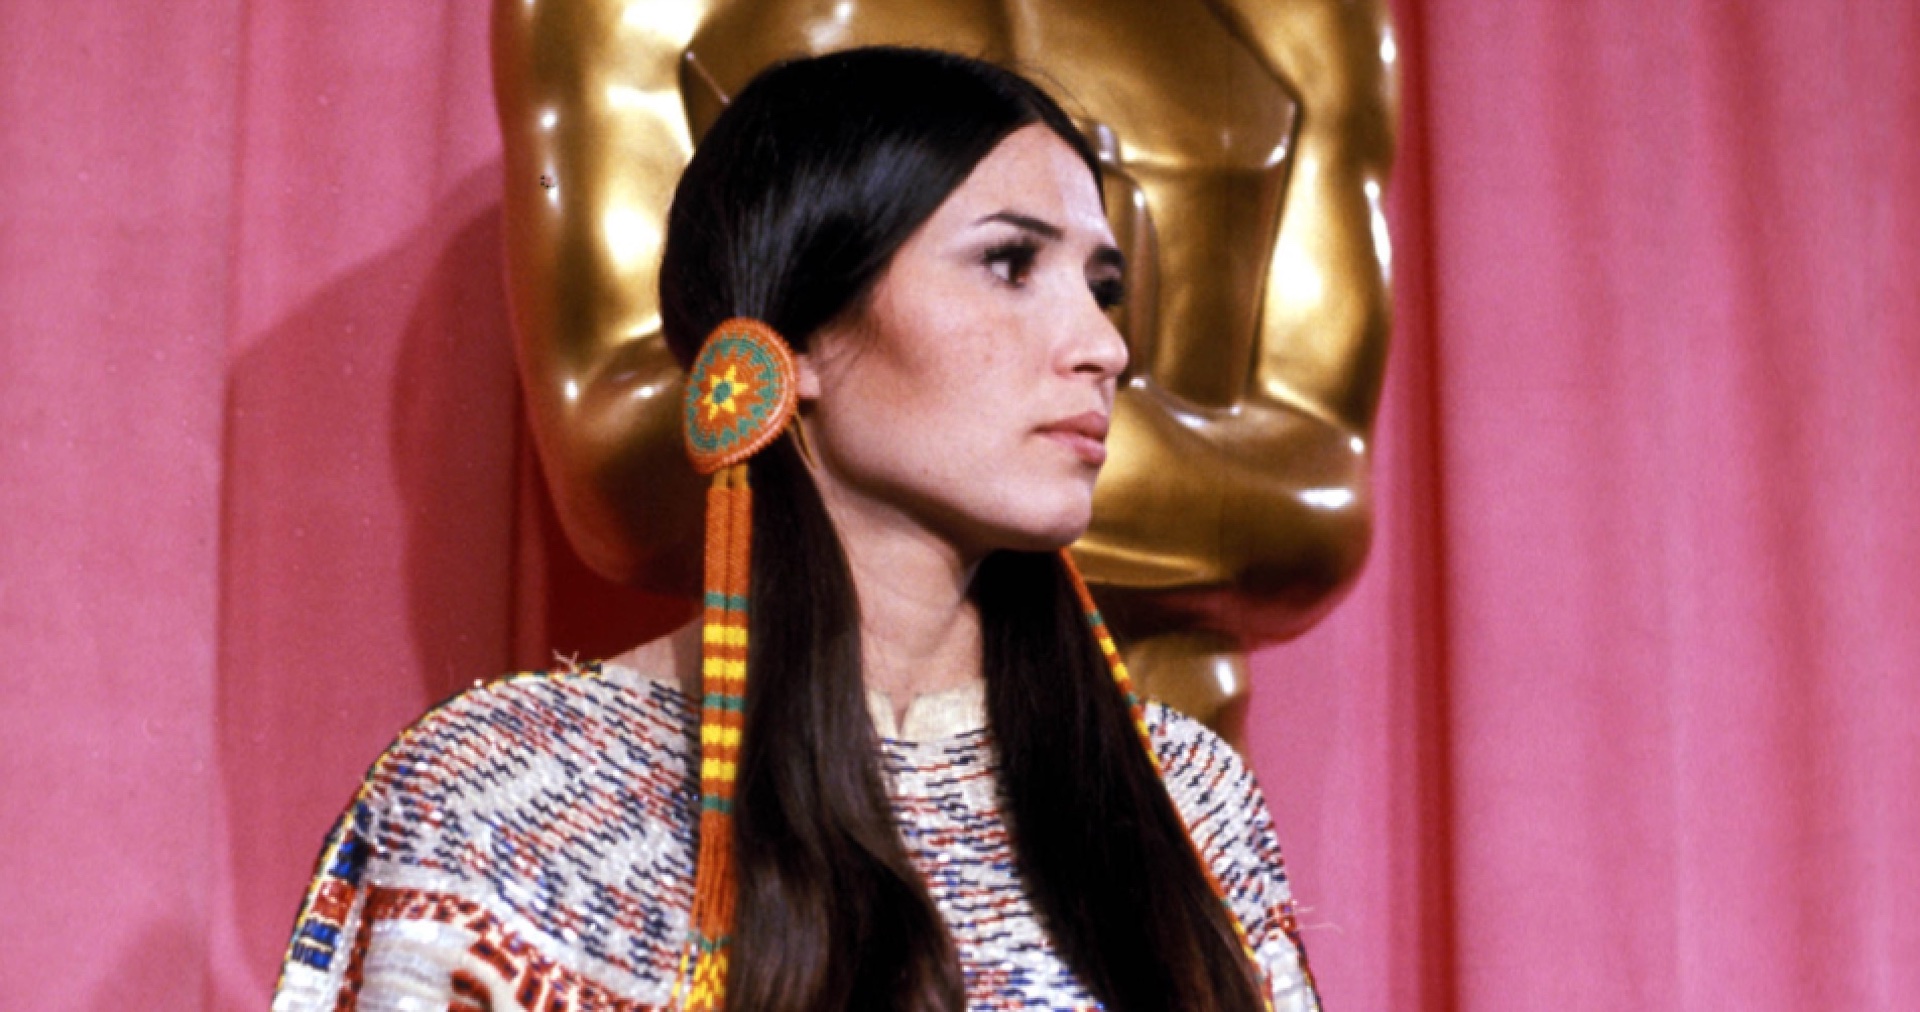 Native American Icon, Sacheen Littlefeather, passed away on October 2 after a weary battle with metastasized breast cancer.